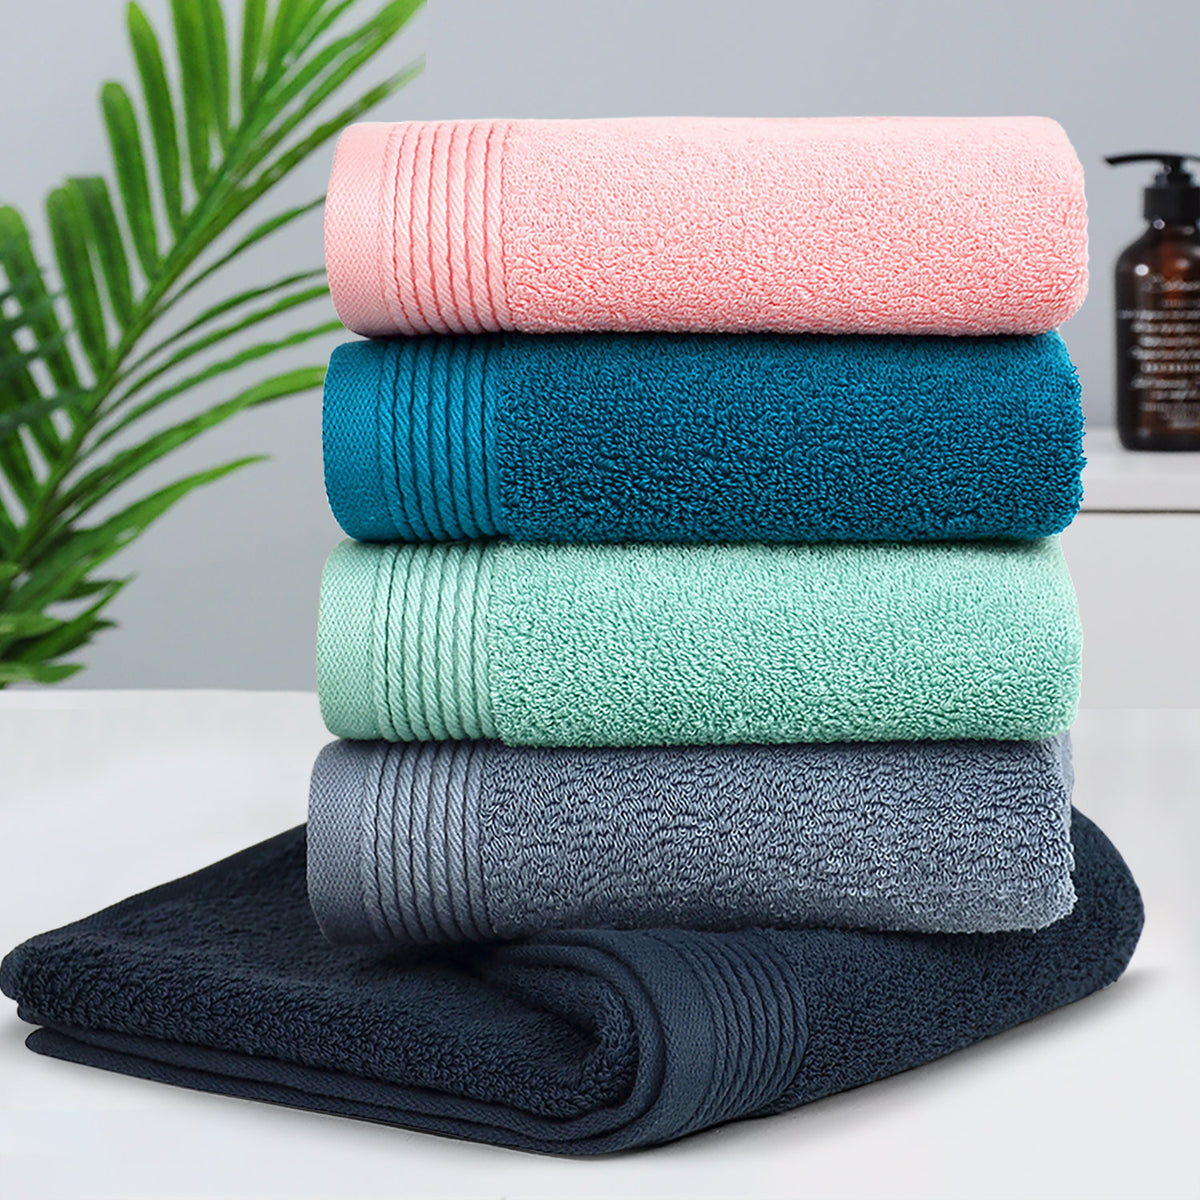  Tropcial Wild Bear Kitchen Towel Set of 4, Absorbent Microfiber Hand  Towels for Kitchen Bathroom Bar Decorative Palm Tree Ultra Soft Resuable  Cleaning Cloths Washable Fast Drying : Home & Kitchen